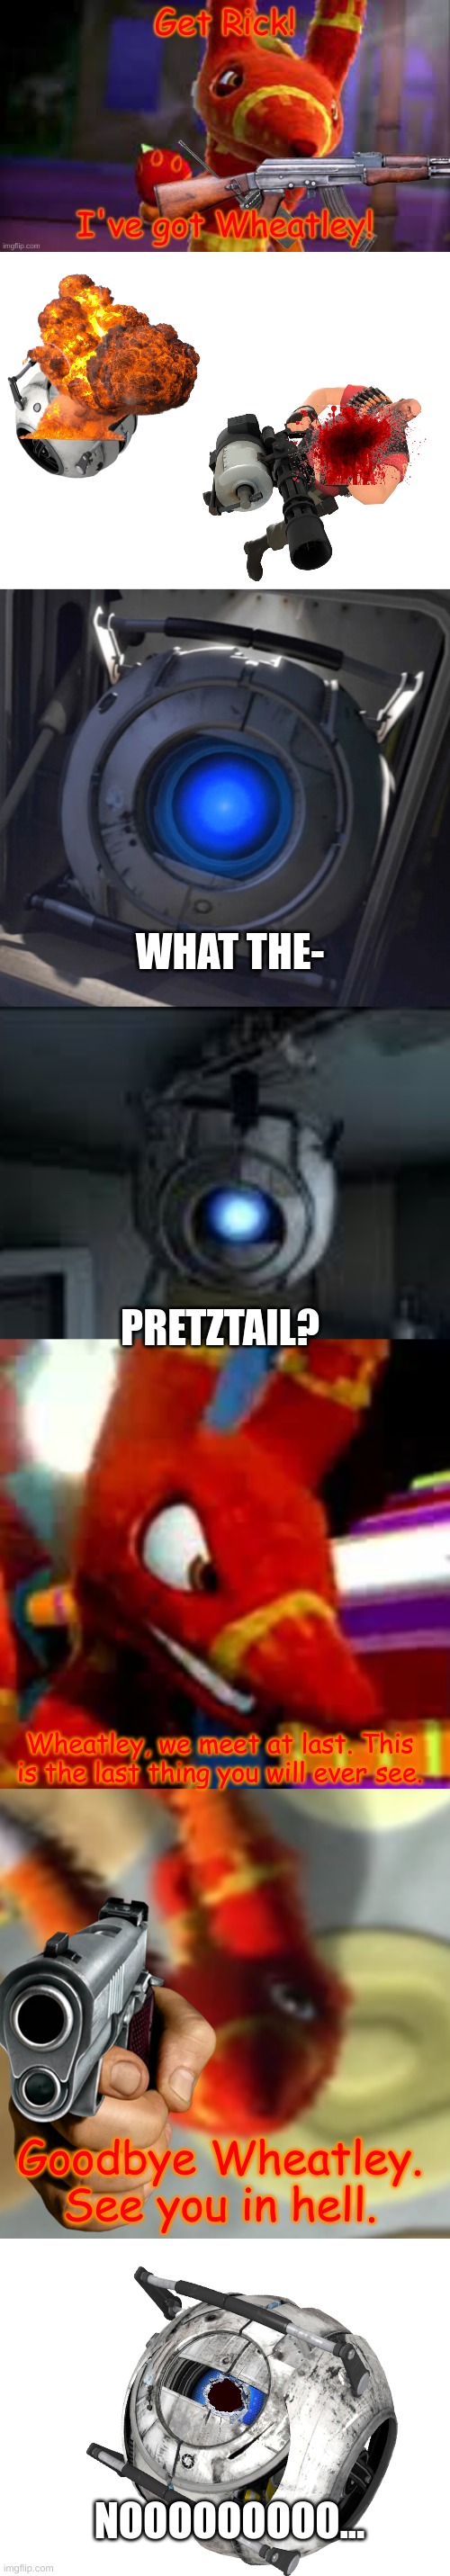 End Of The Line, Finale. | WHAT THE-; PRETZTAIL? Wheatley, we meet at last. This is the last thing you will ever see. Goodbye Wheatley. See you in hell. NOOOOOOOOO... | image tagged in blank white template,wheatley,wheatley serious braindamage | made w/ Imgflip meme maker